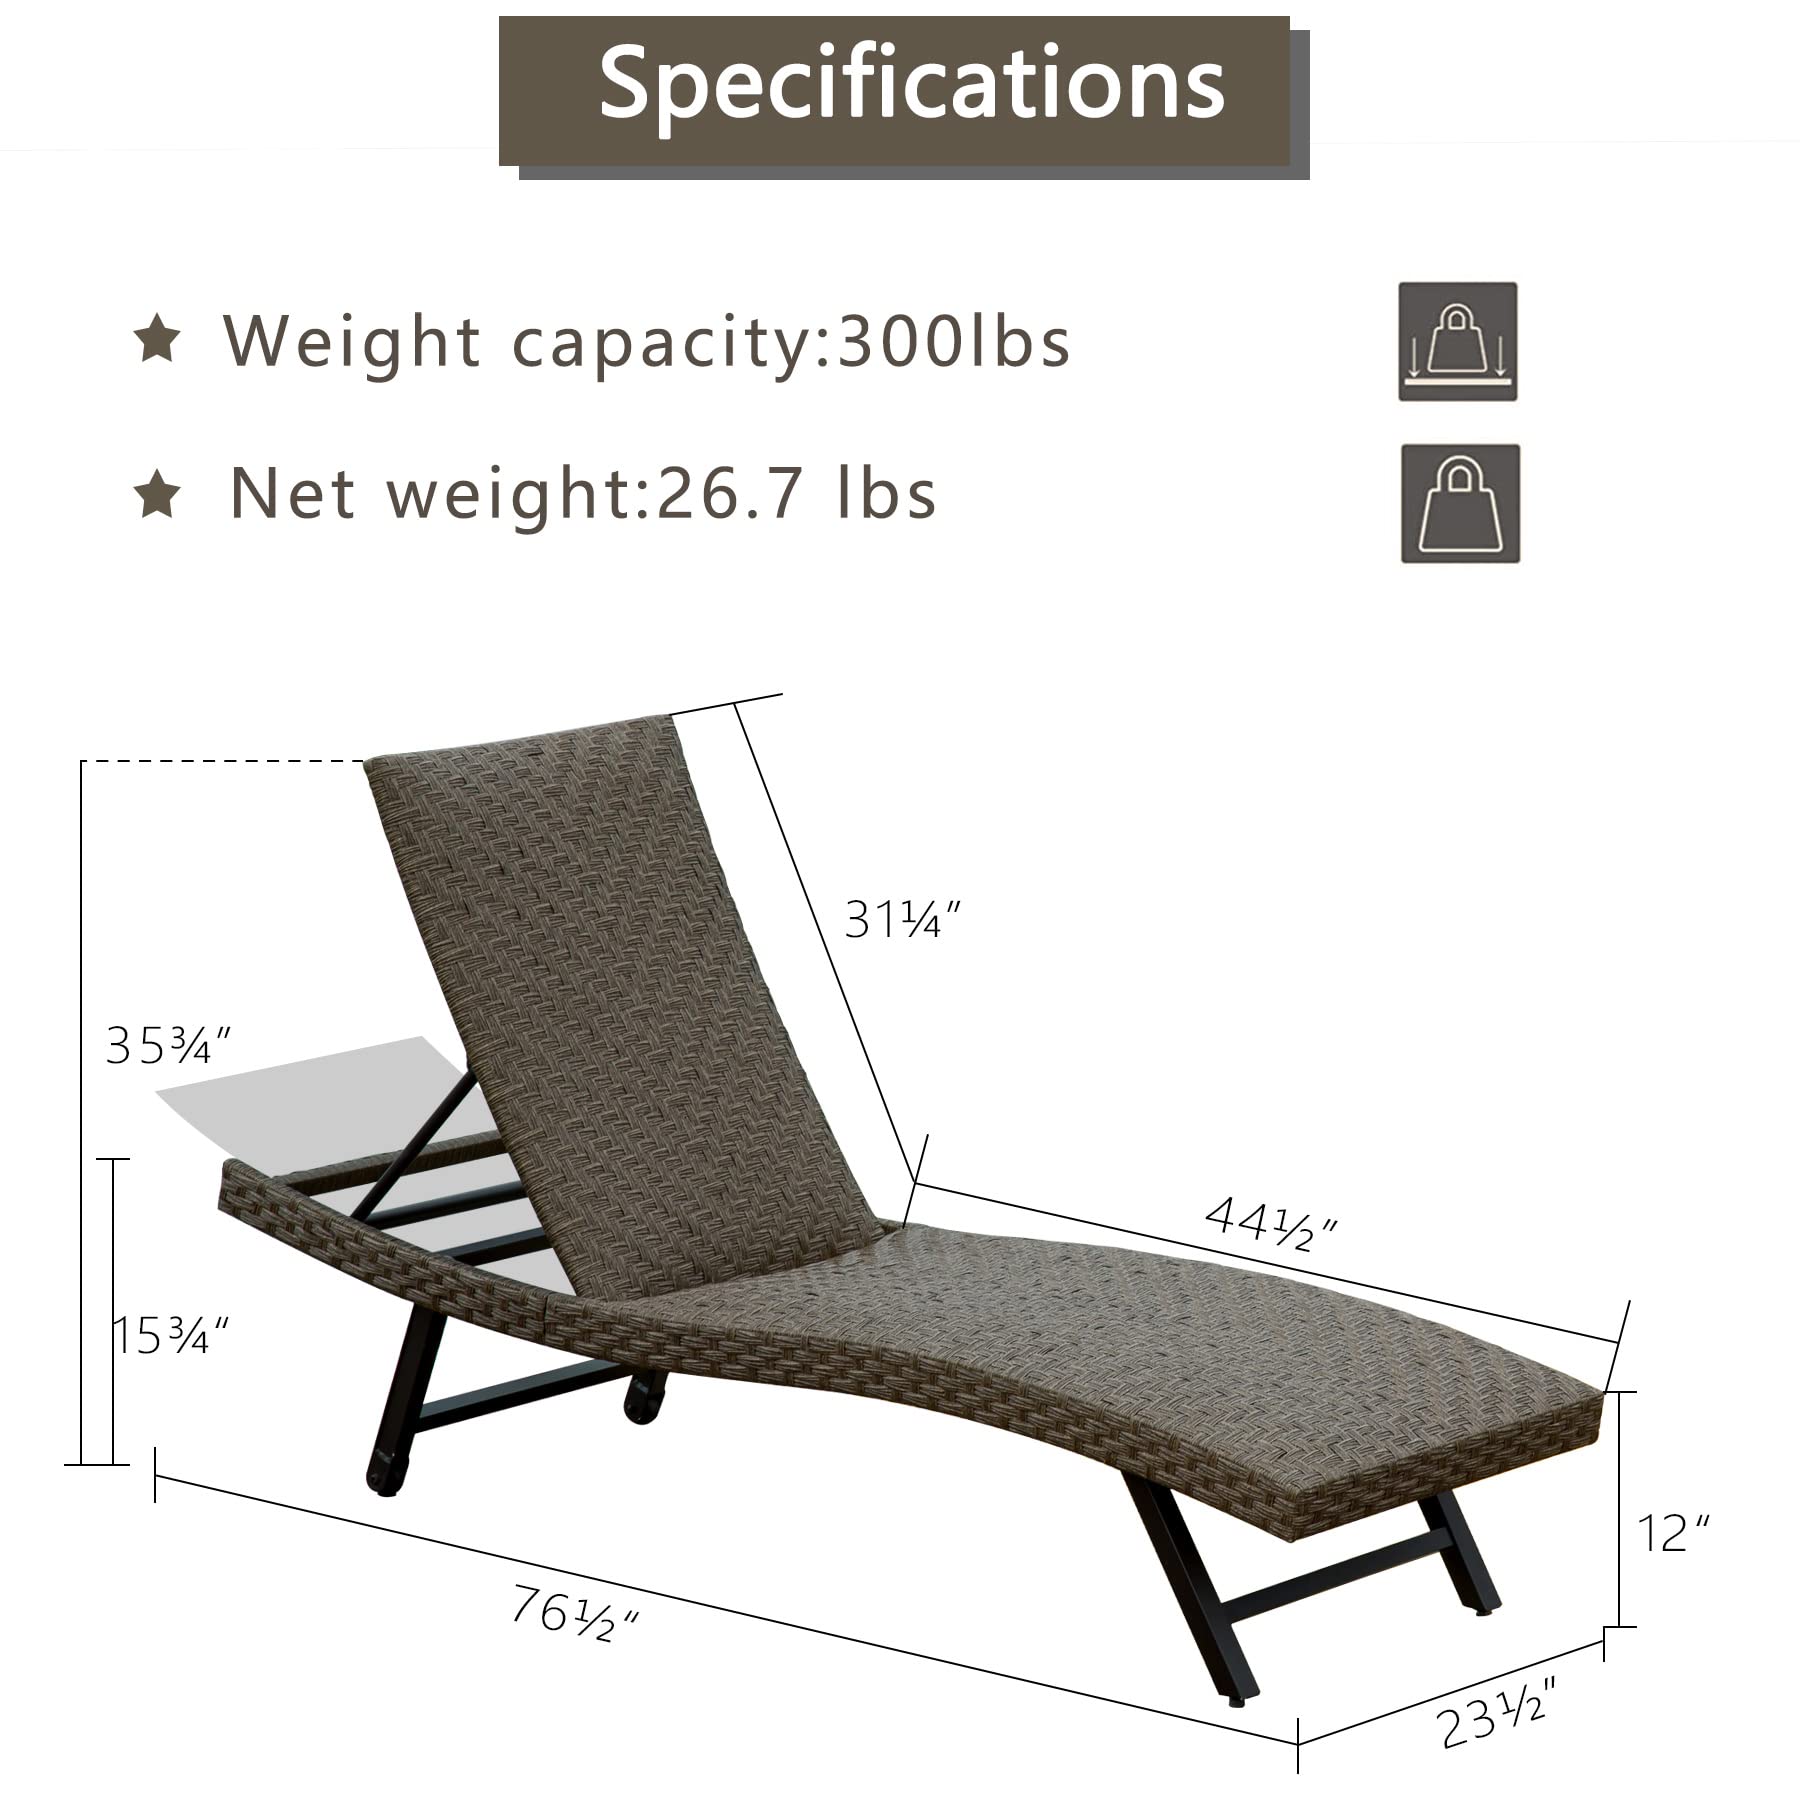 Mydepot Domi Outdoor Living PE Rattan Chaise Lounge, Set of 2 Patio Reclining Chair, Patio Furniture - image 4 of 8